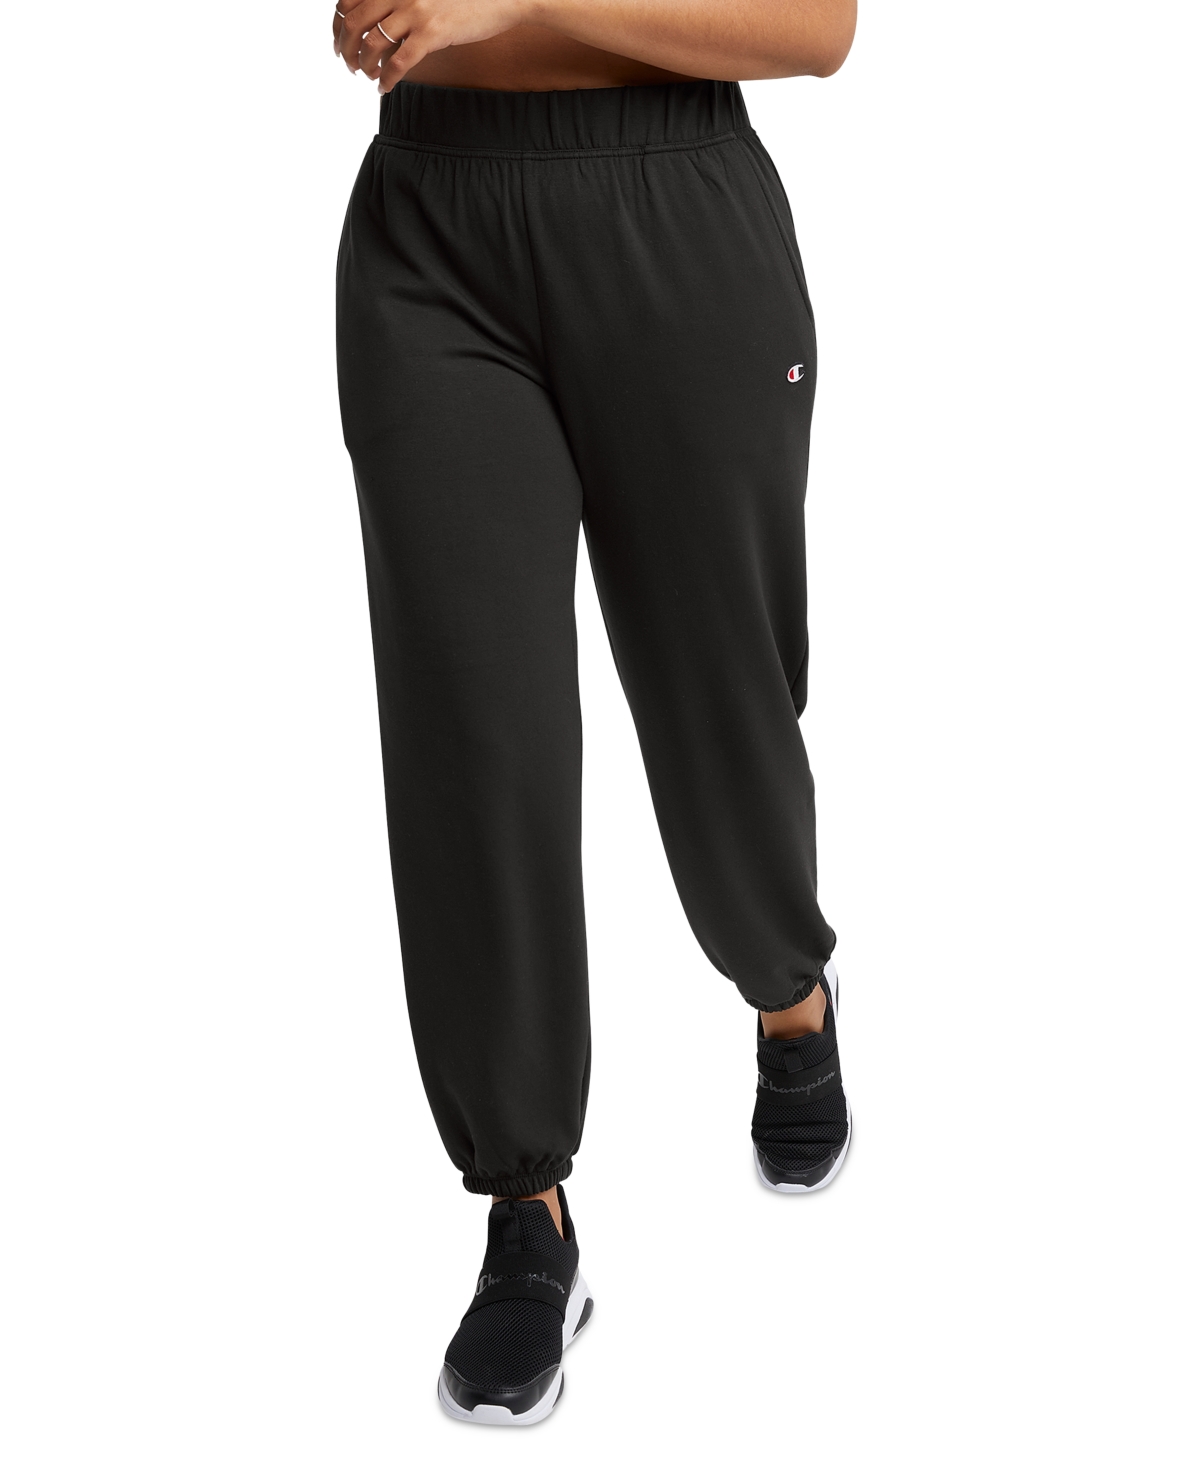 Champion Women's Soft Touch Pull-On Jogger Sweatpants